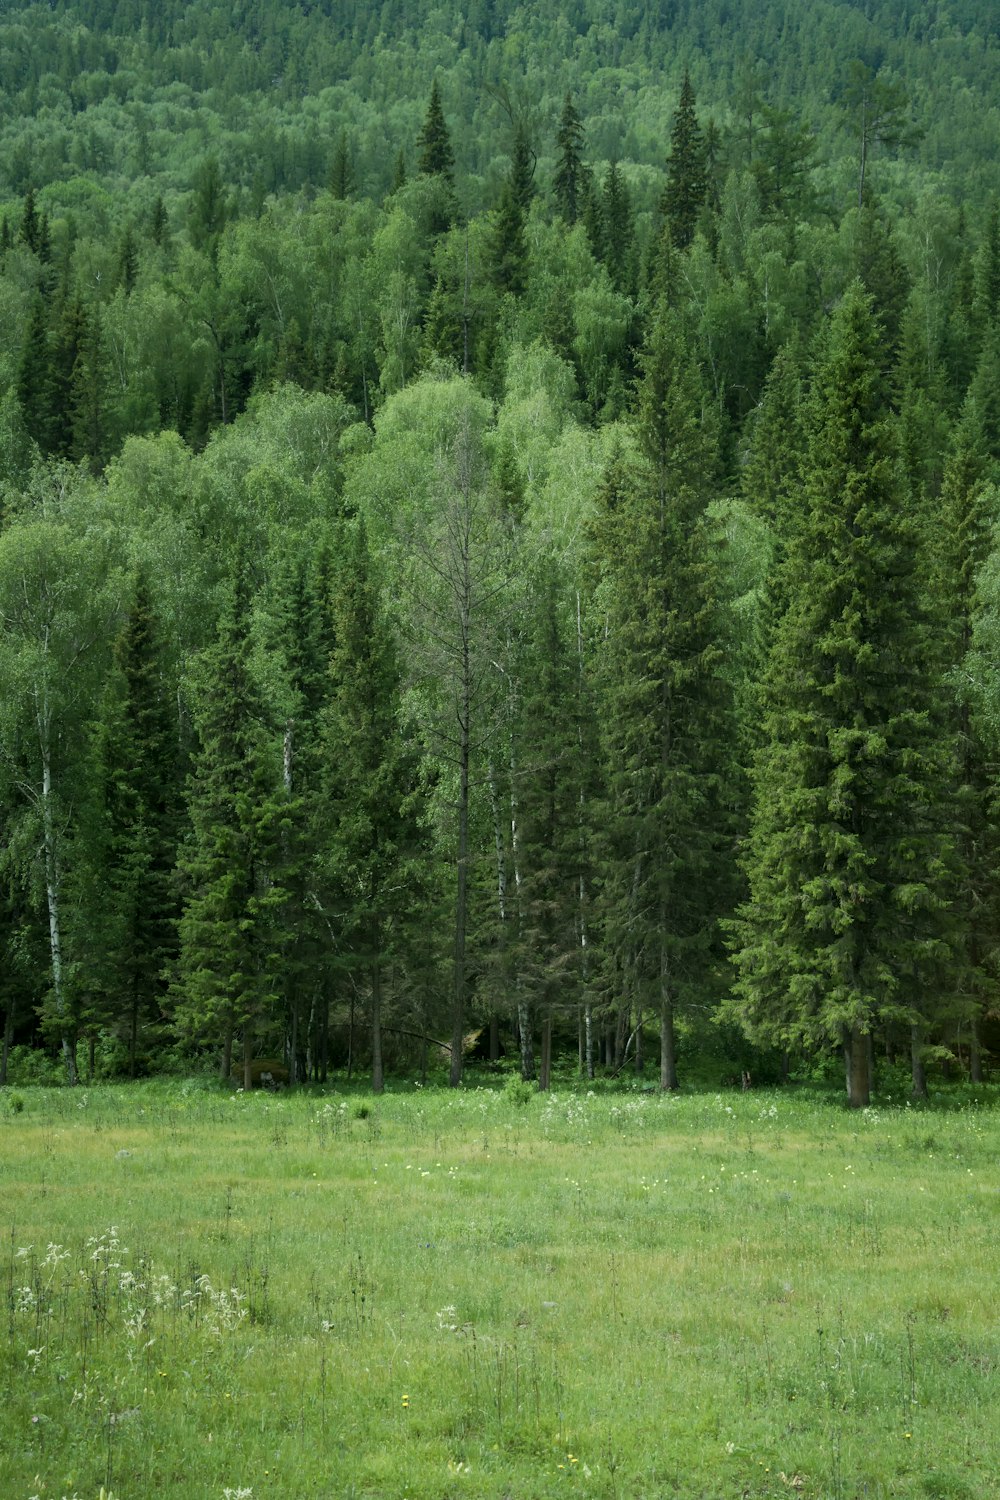 a horse standing in a field next to a forest